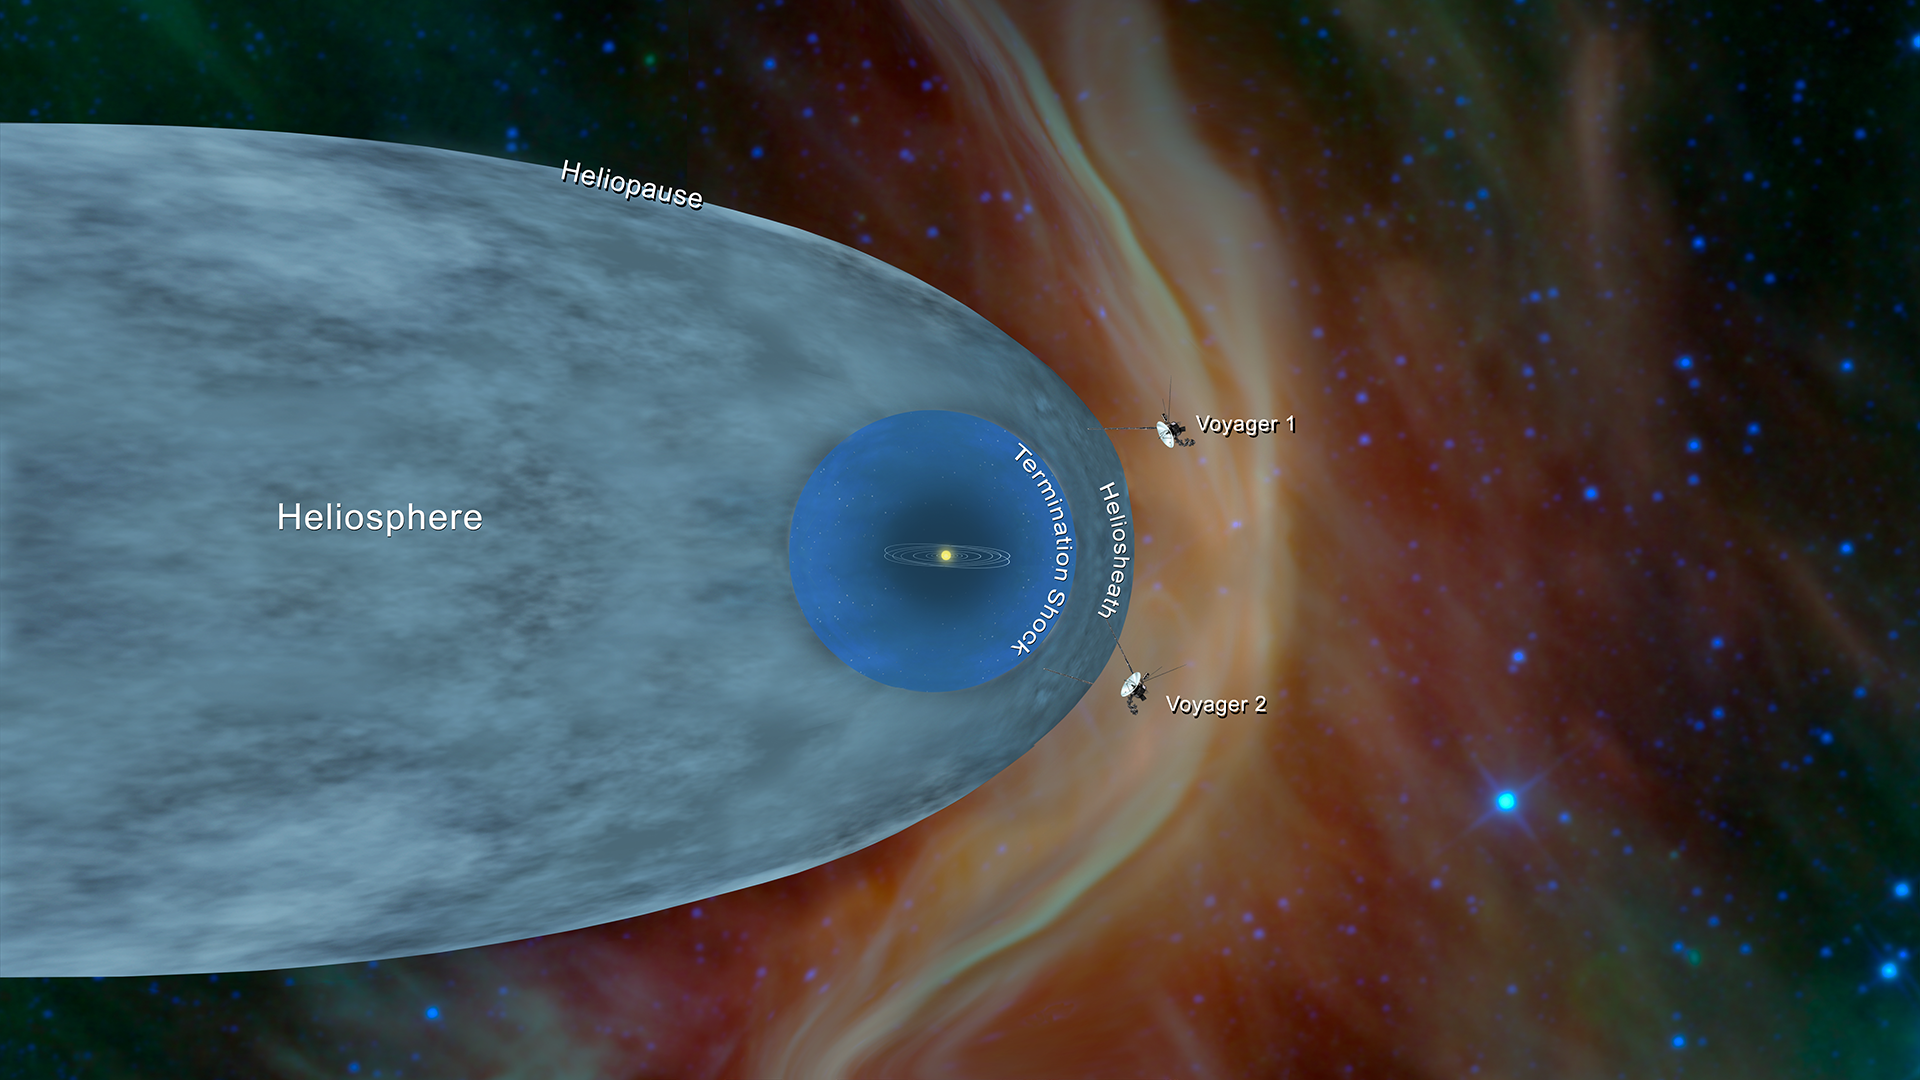 Voyager_1_and_2_position.png